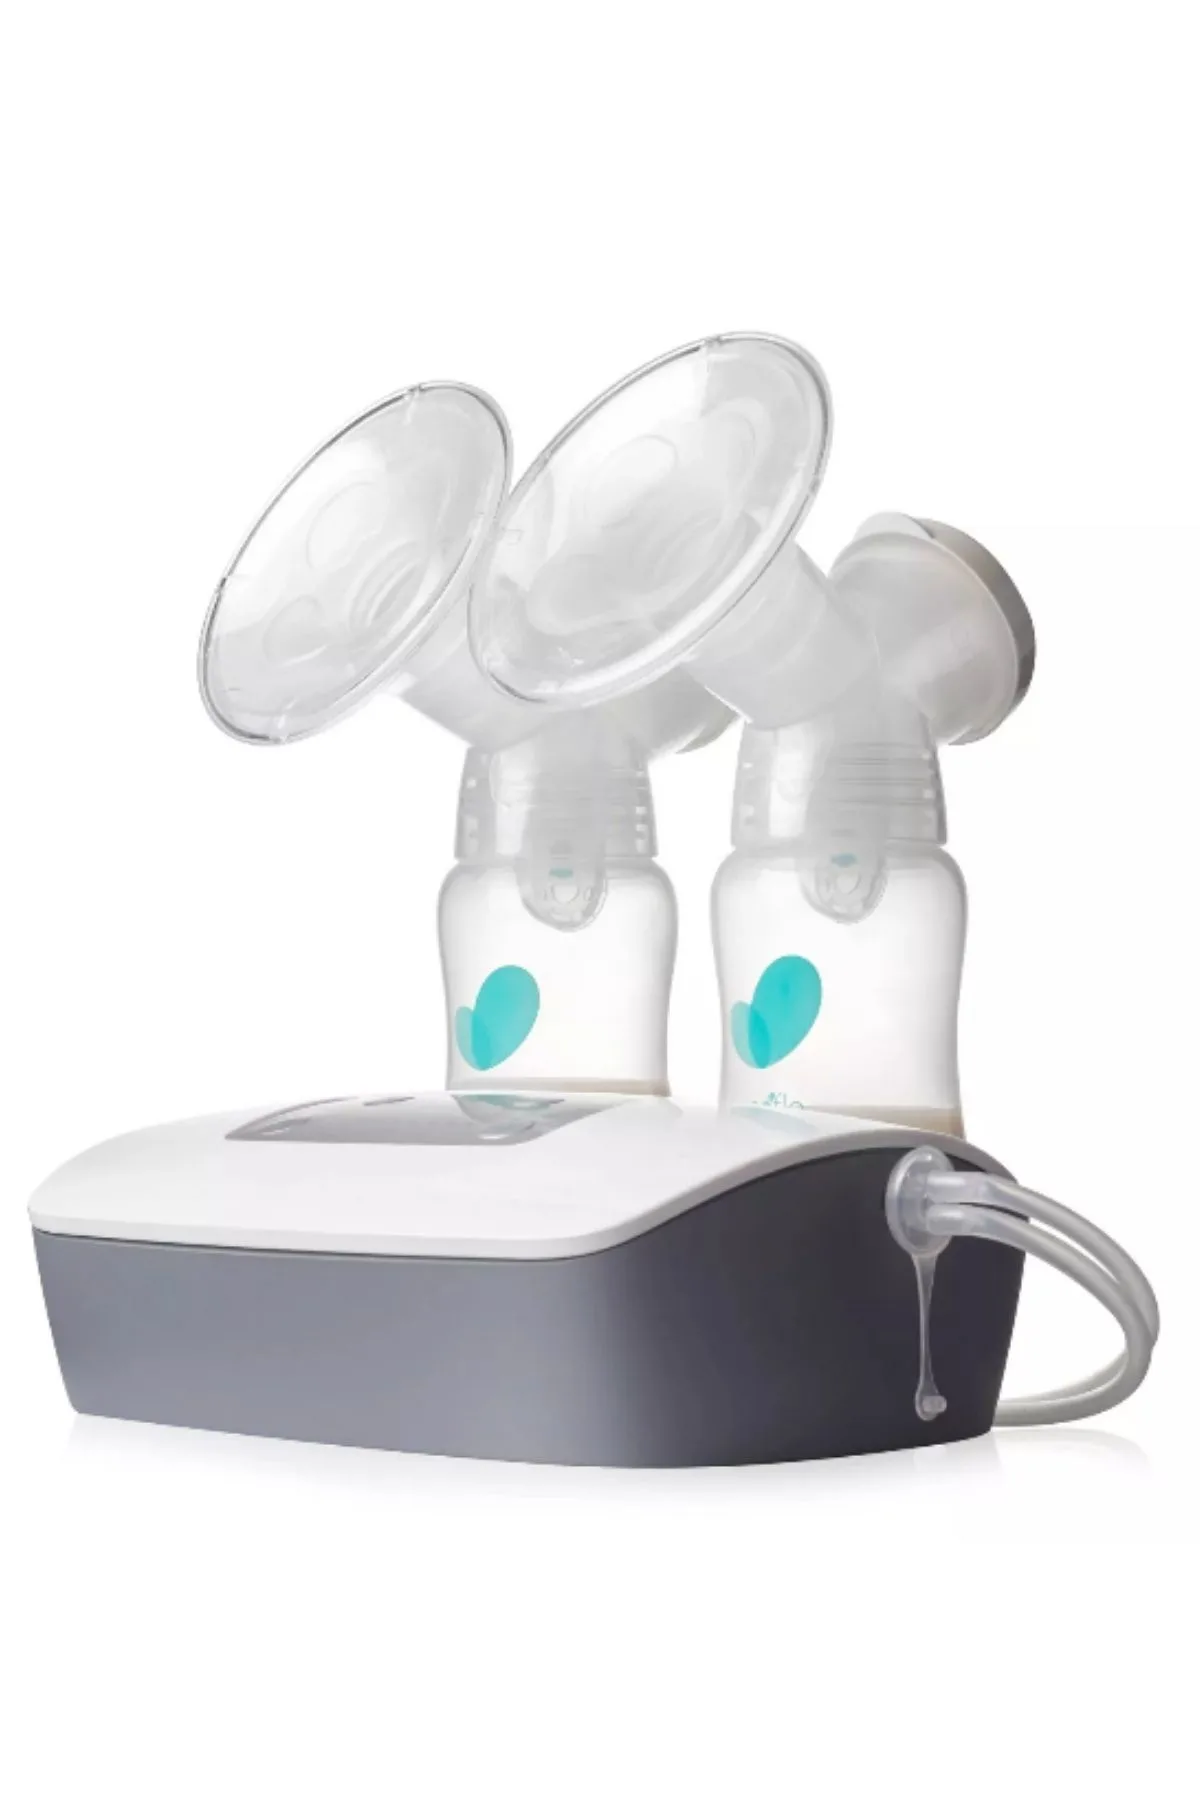 Electric breast pump on white background.